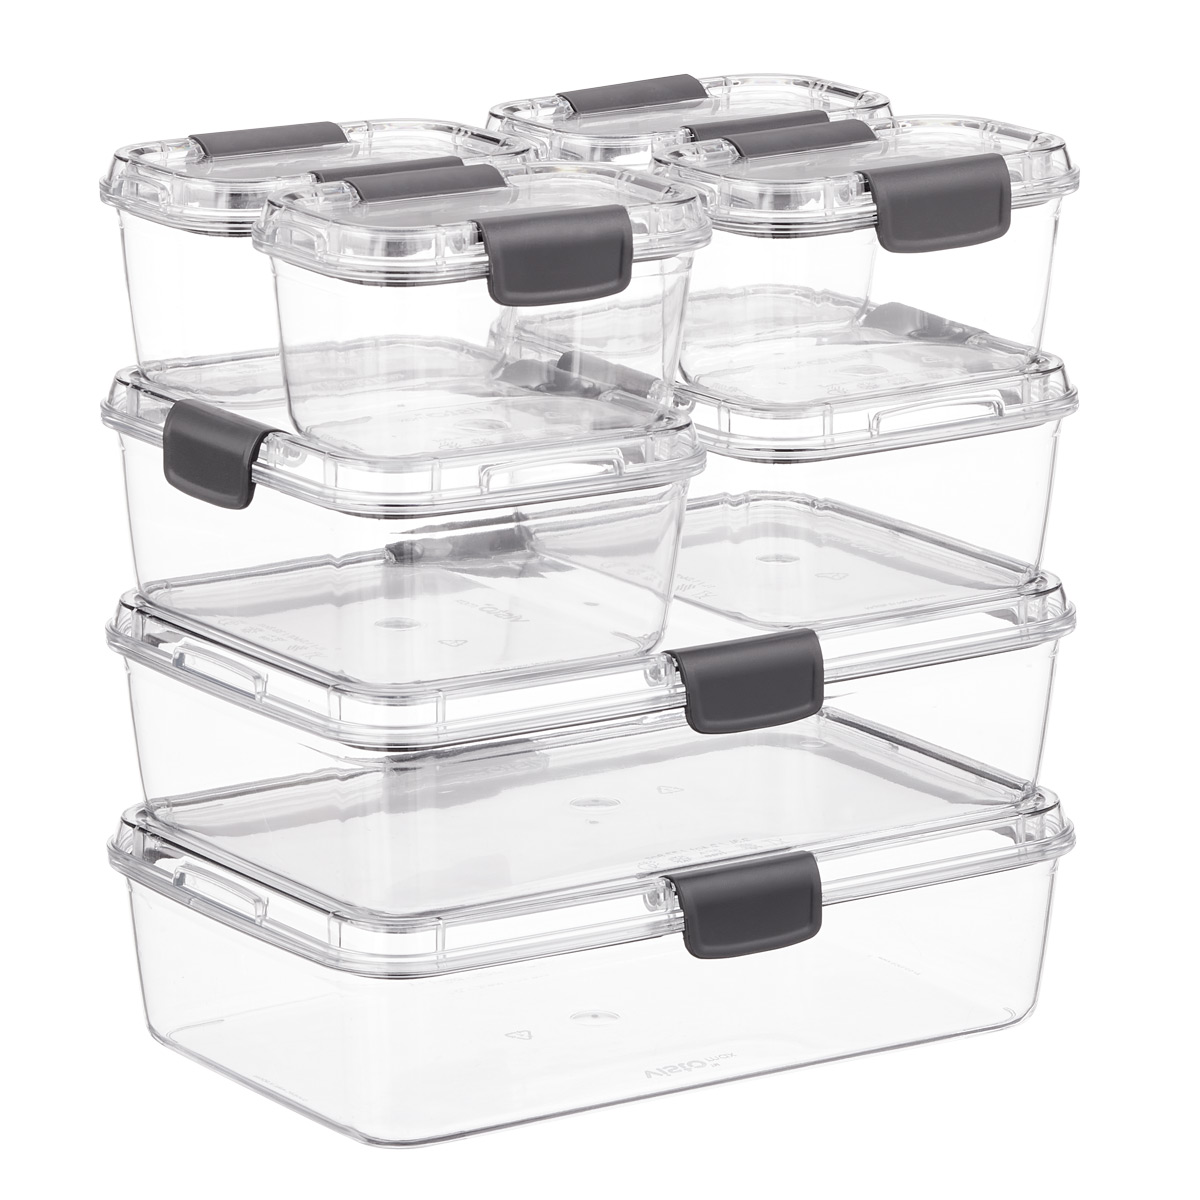 https://www.containerstore.com/catalogimages/438074/10083918_Titan_Food_Storage_Set_Of_8.jpg